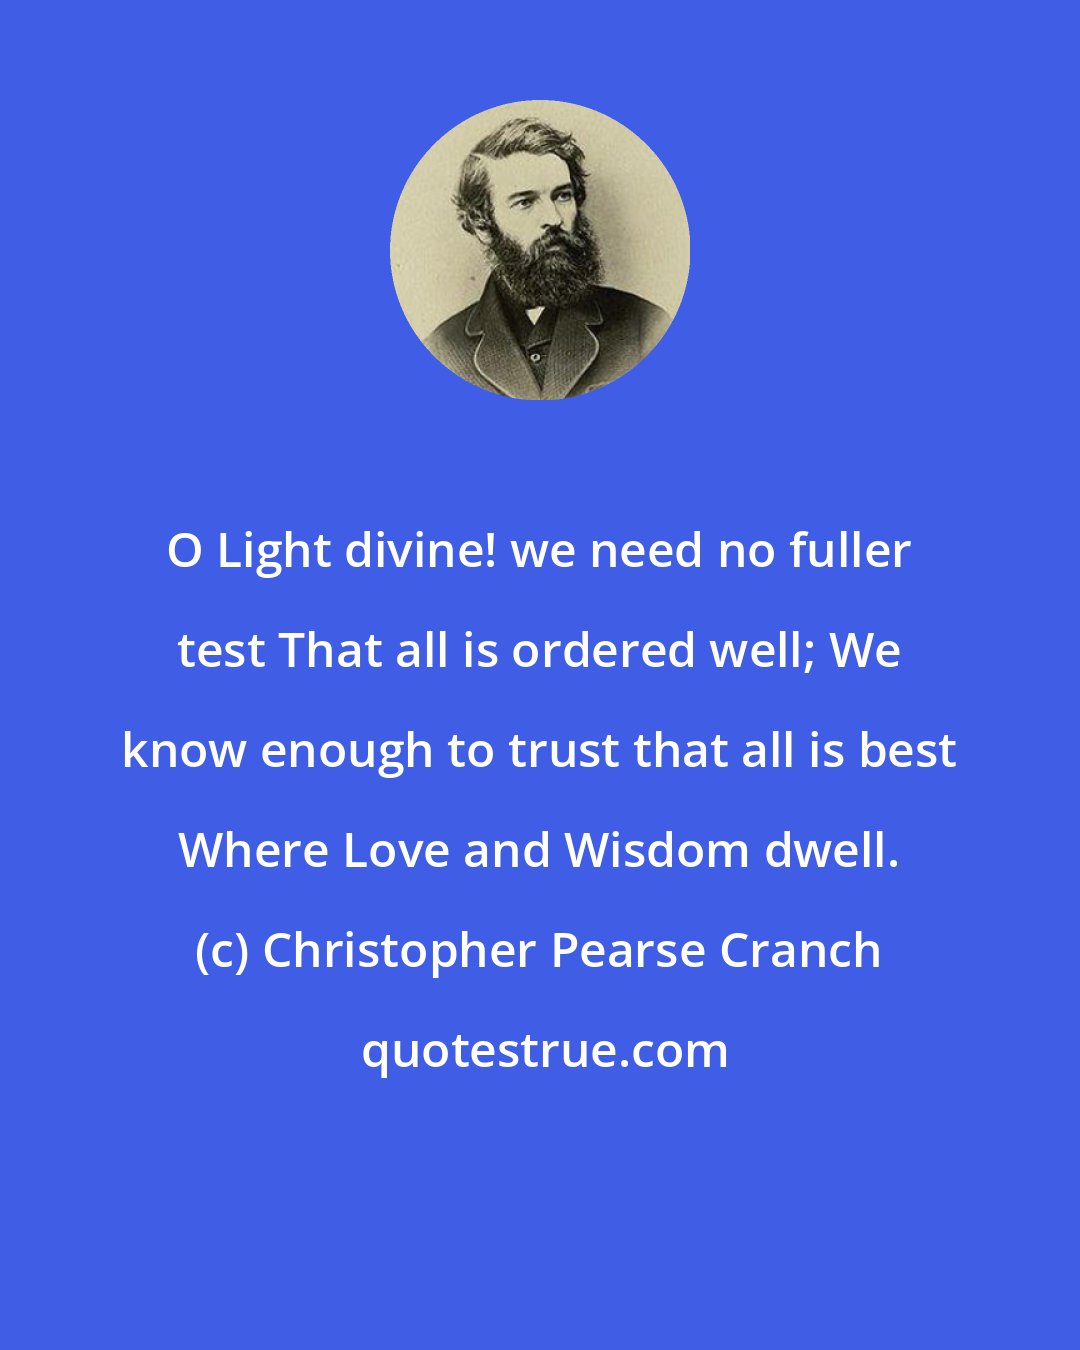 Christopher Pearse Cranch: O Light divine! we need no fuller test That all is ordered well; We know enough to trust that all is best Where Love and Wisdom dwell.